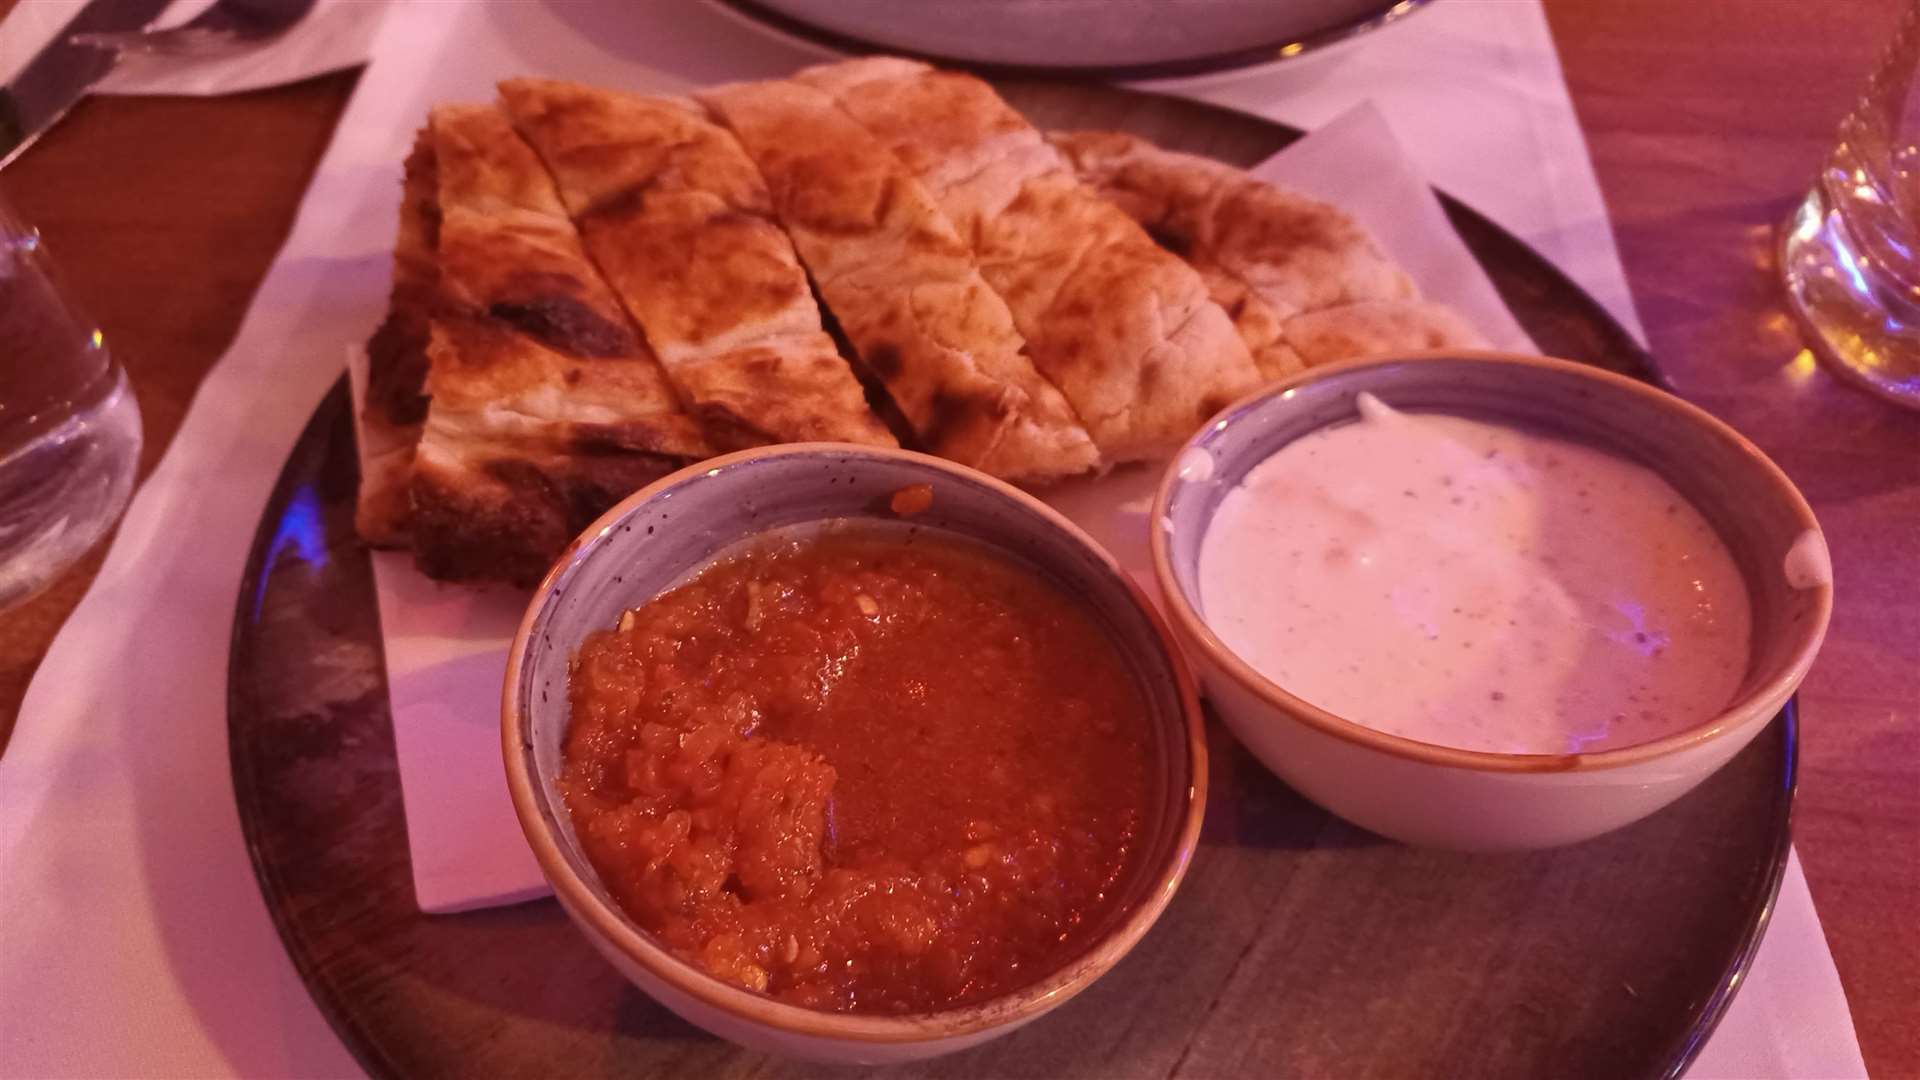 Every table was given Turkish bread and dips